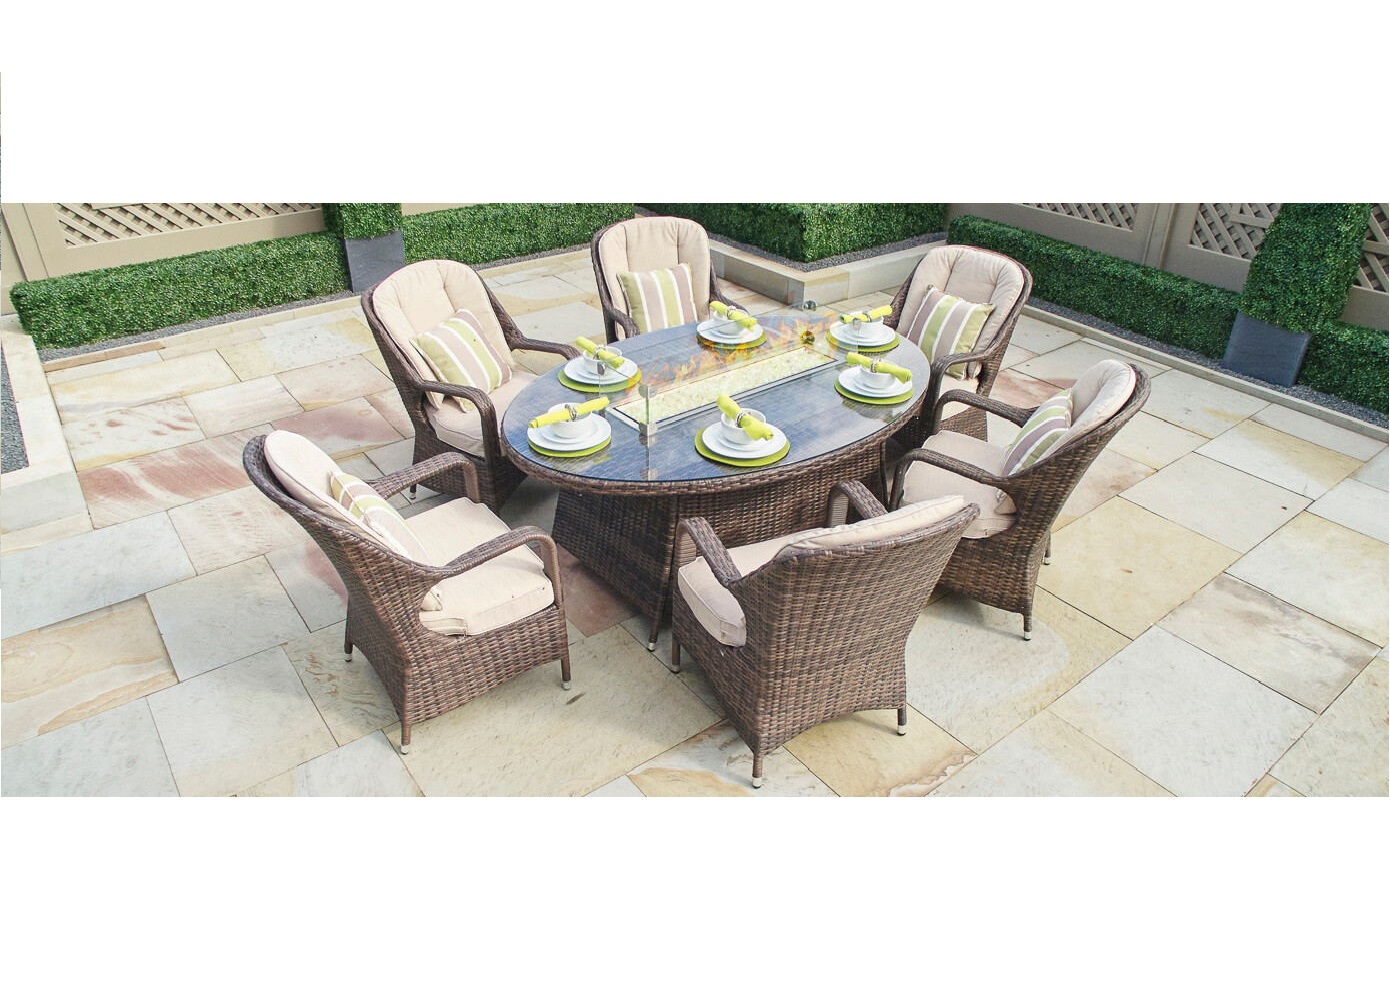 Patio Wicker Oval Table With Arm Chairs, Outdoor Gas Fire Pit Sets